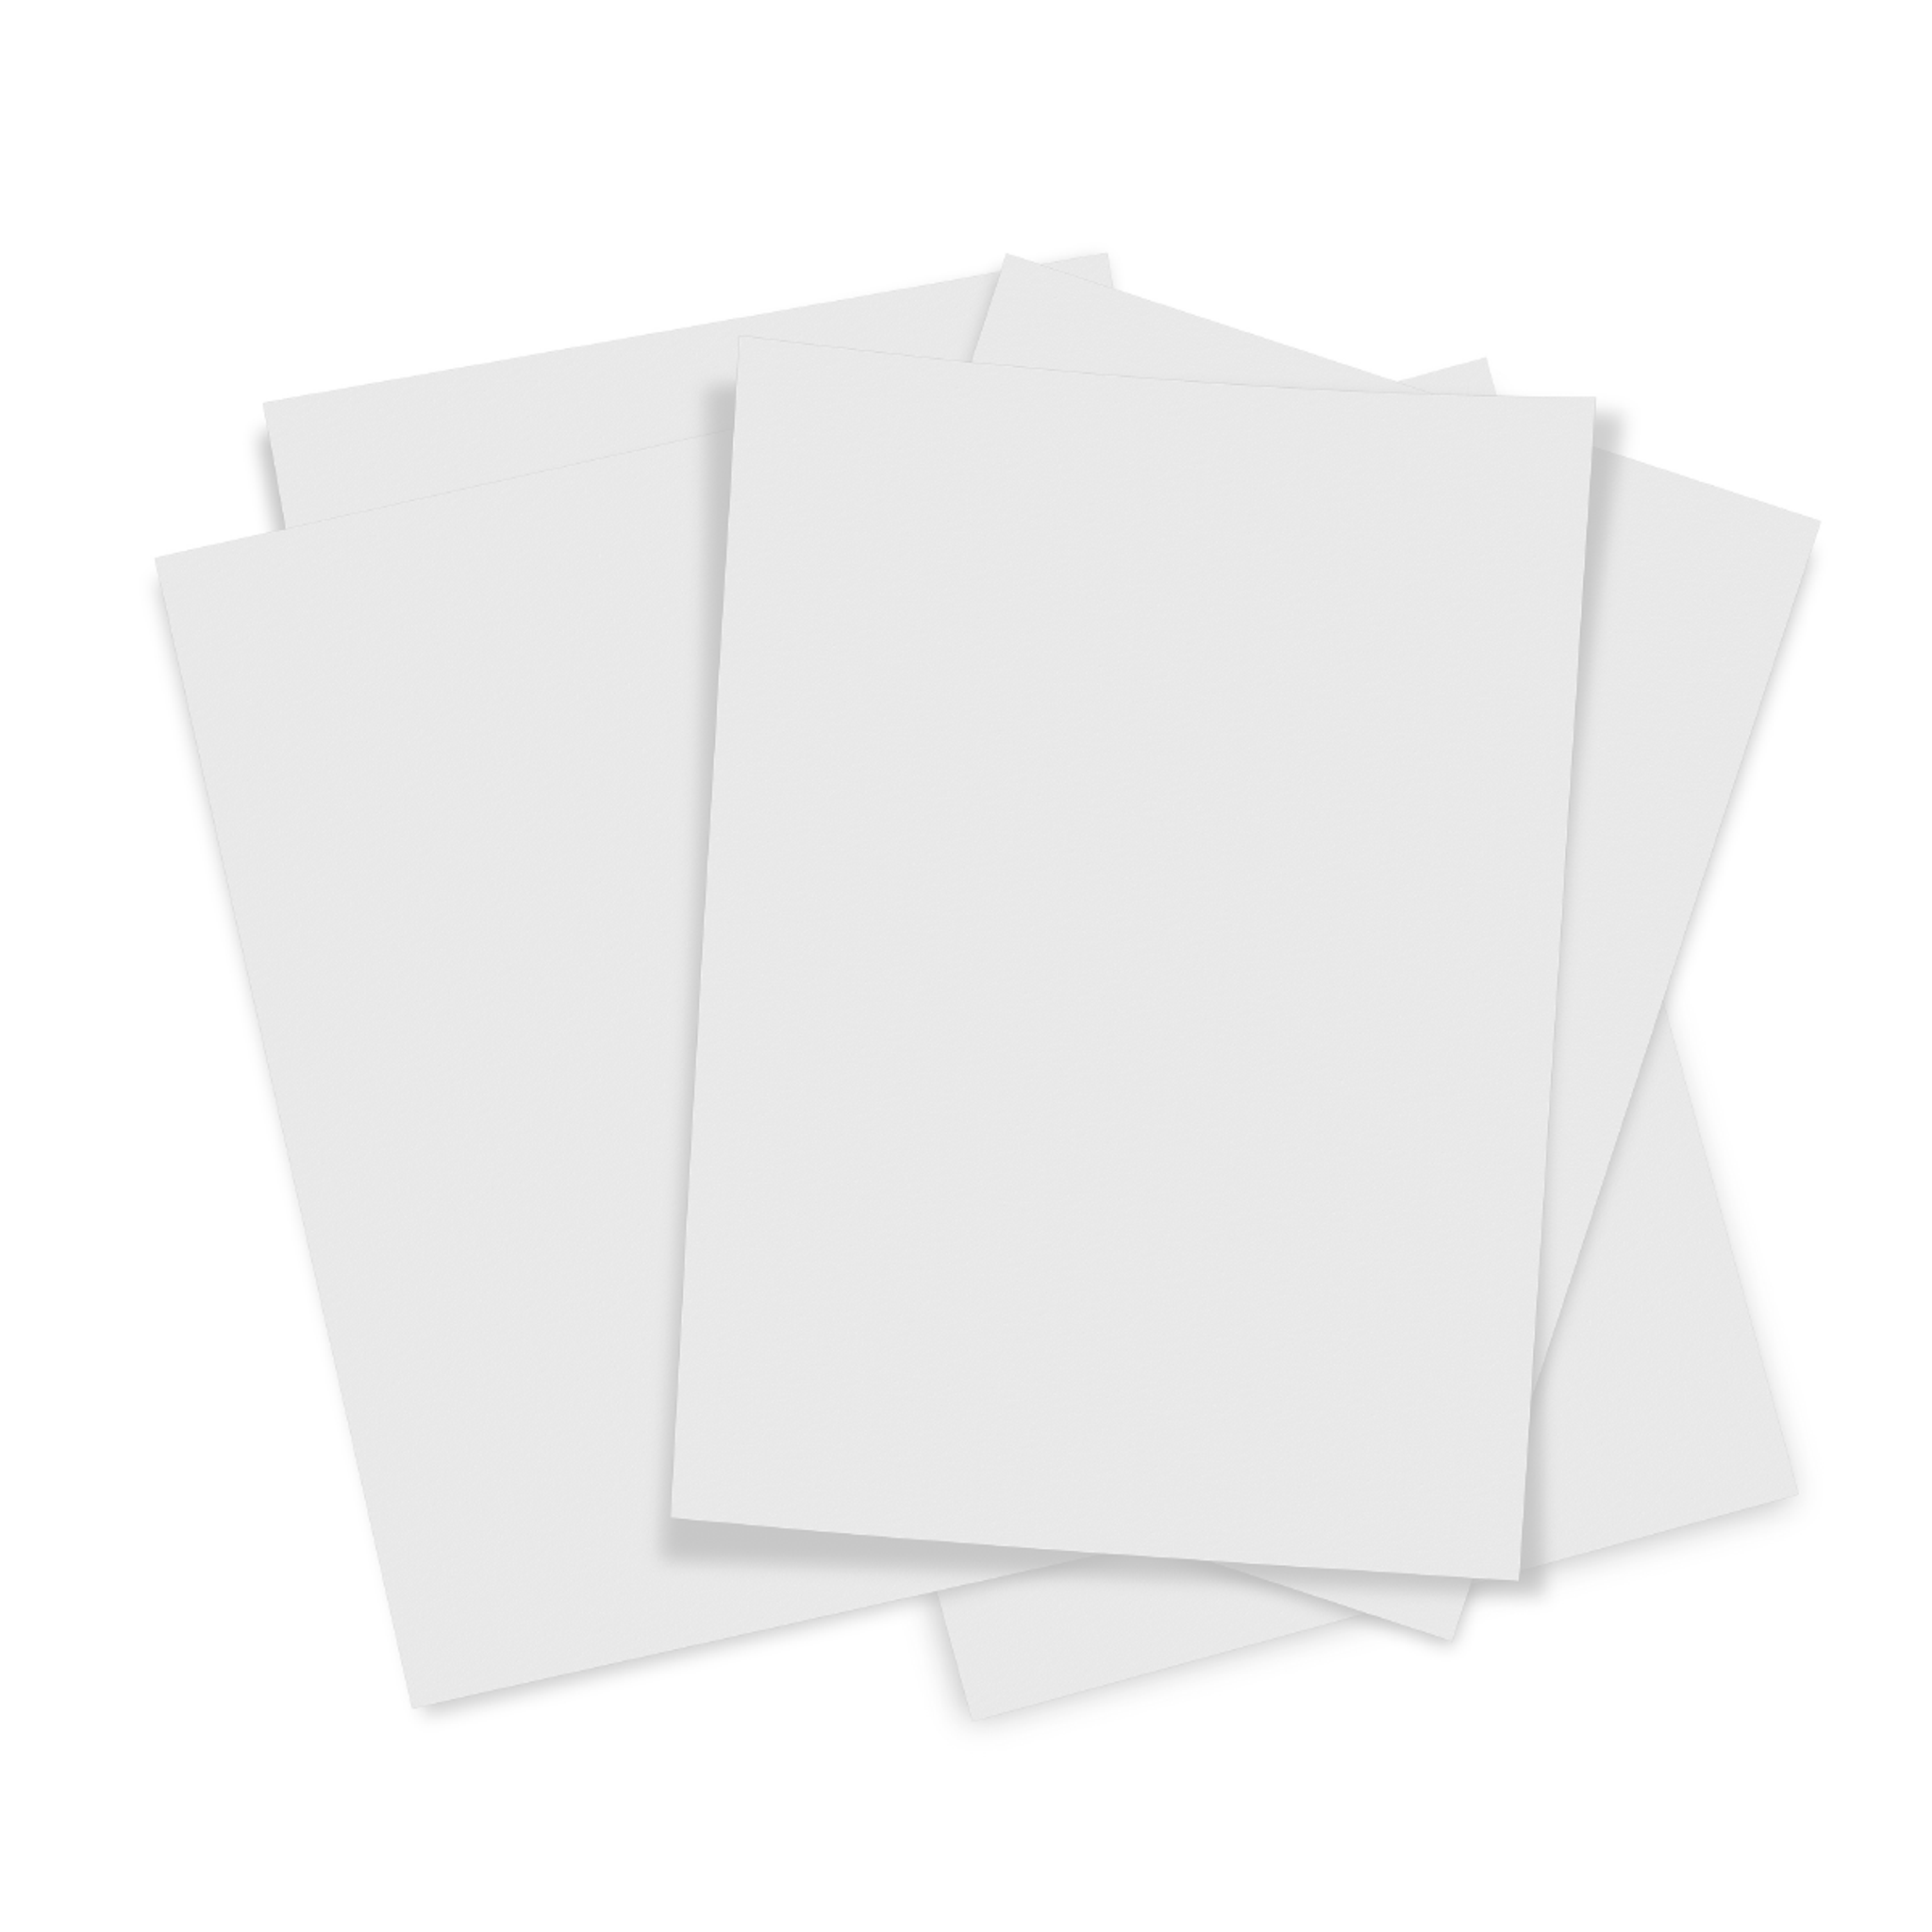 Evo Synthetic Paper 9x12 10 Sheets